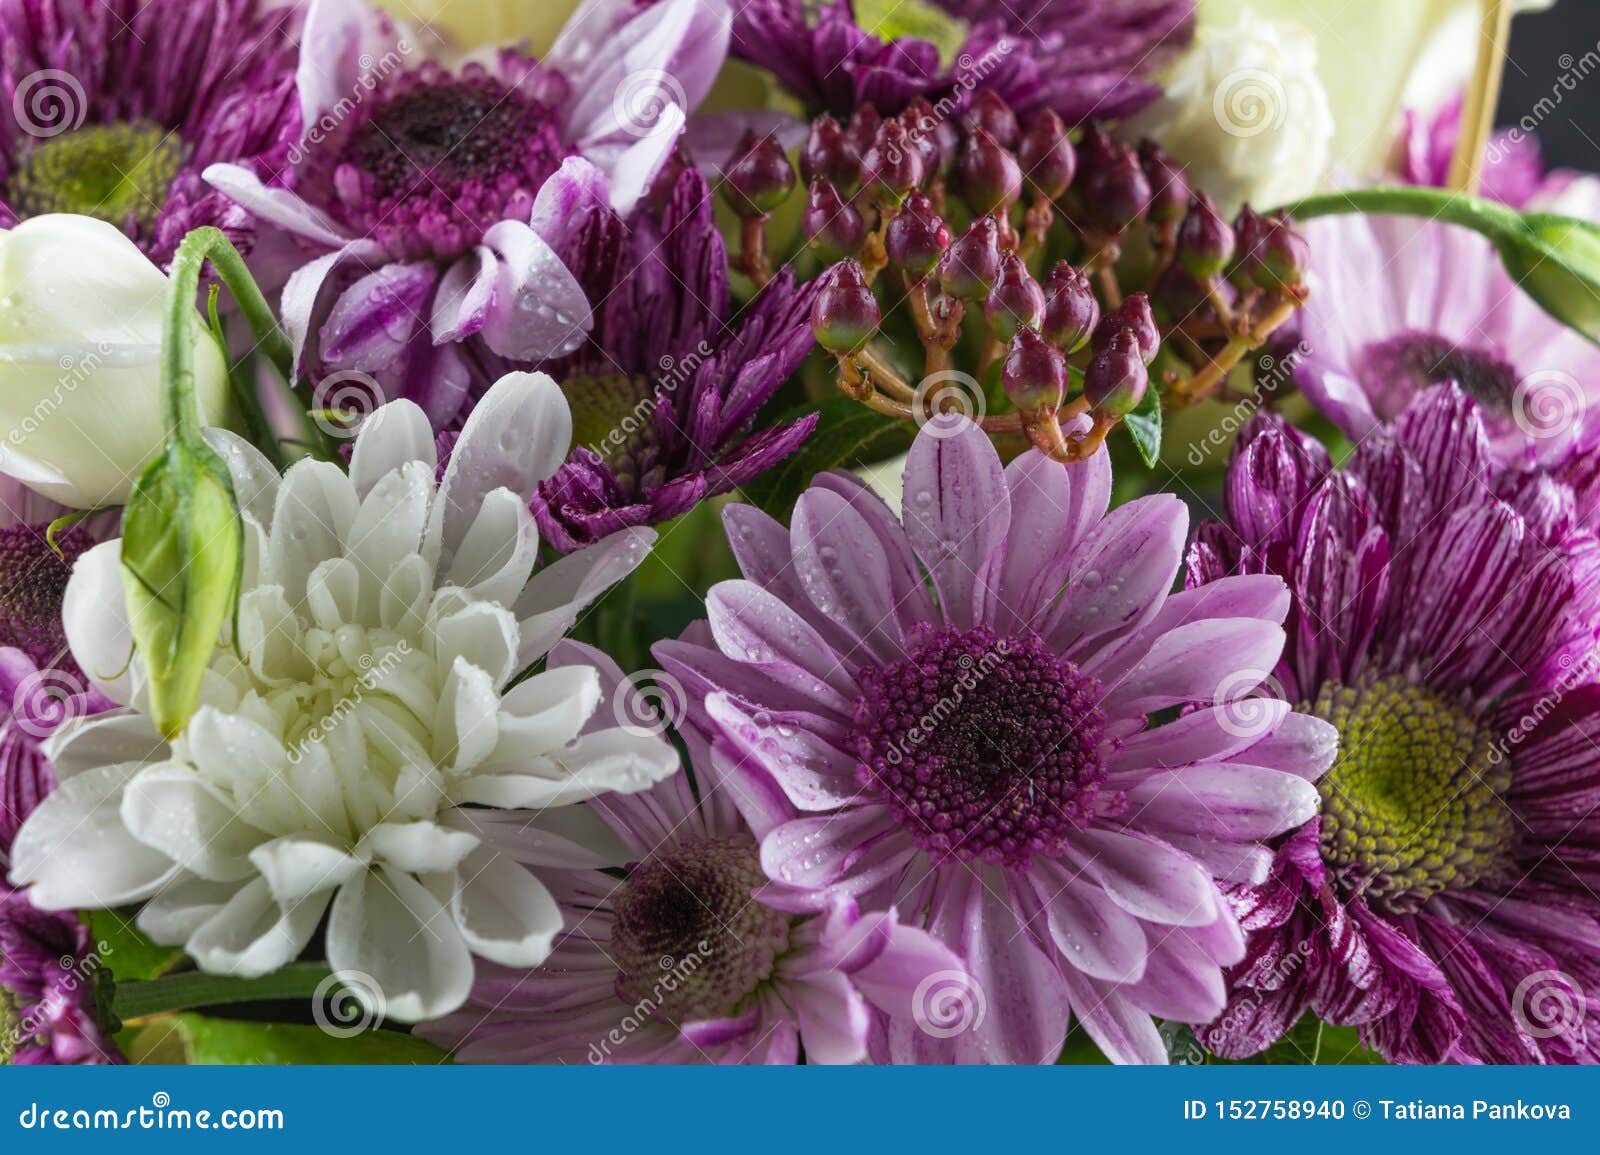 Bouquet of White and Purple Chrysanthemums. Macro Photo Flowers Stock ...